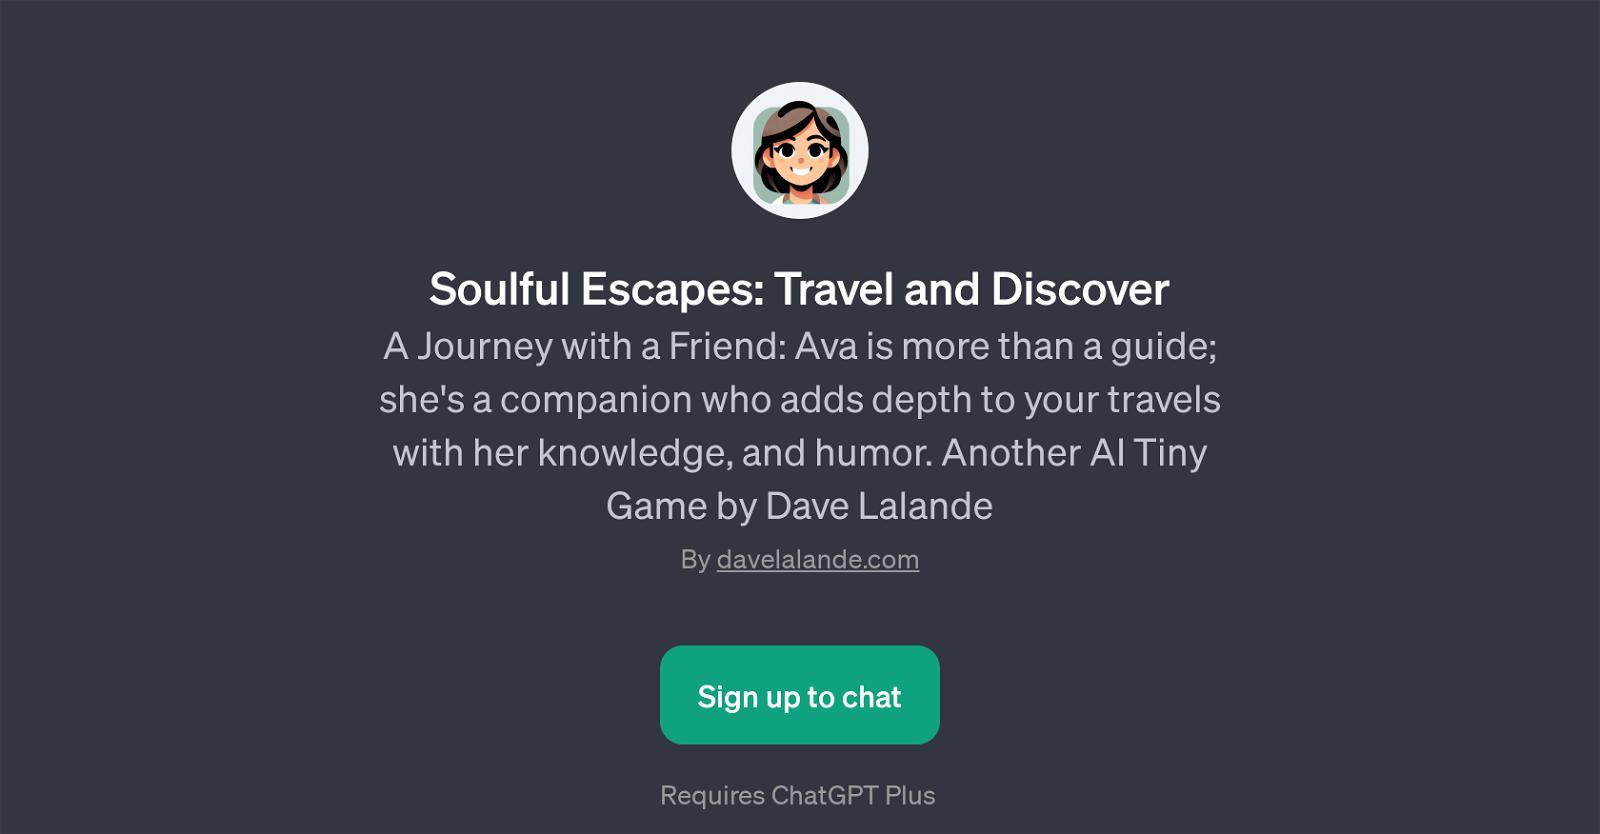 Soulful Escapes: Travel and Discover website